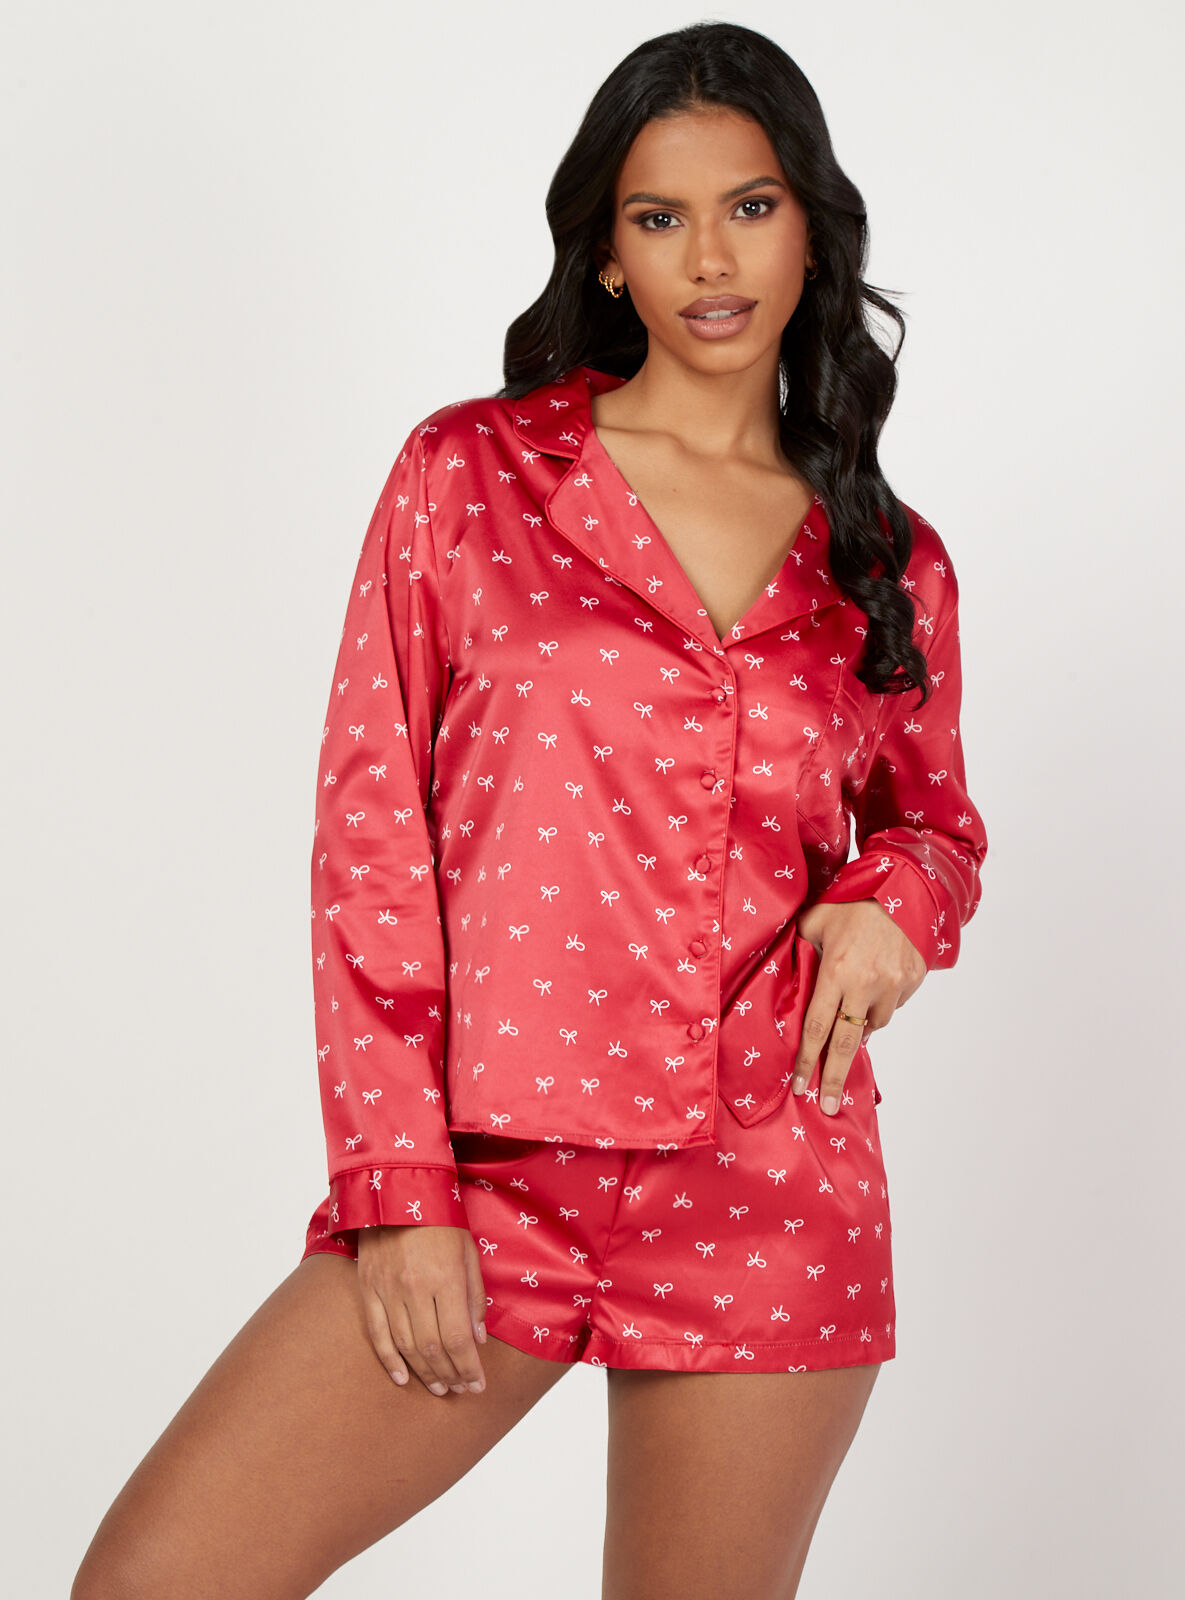 Boux Avenue Bow print satin revere and shorts set - Red Mix - 14